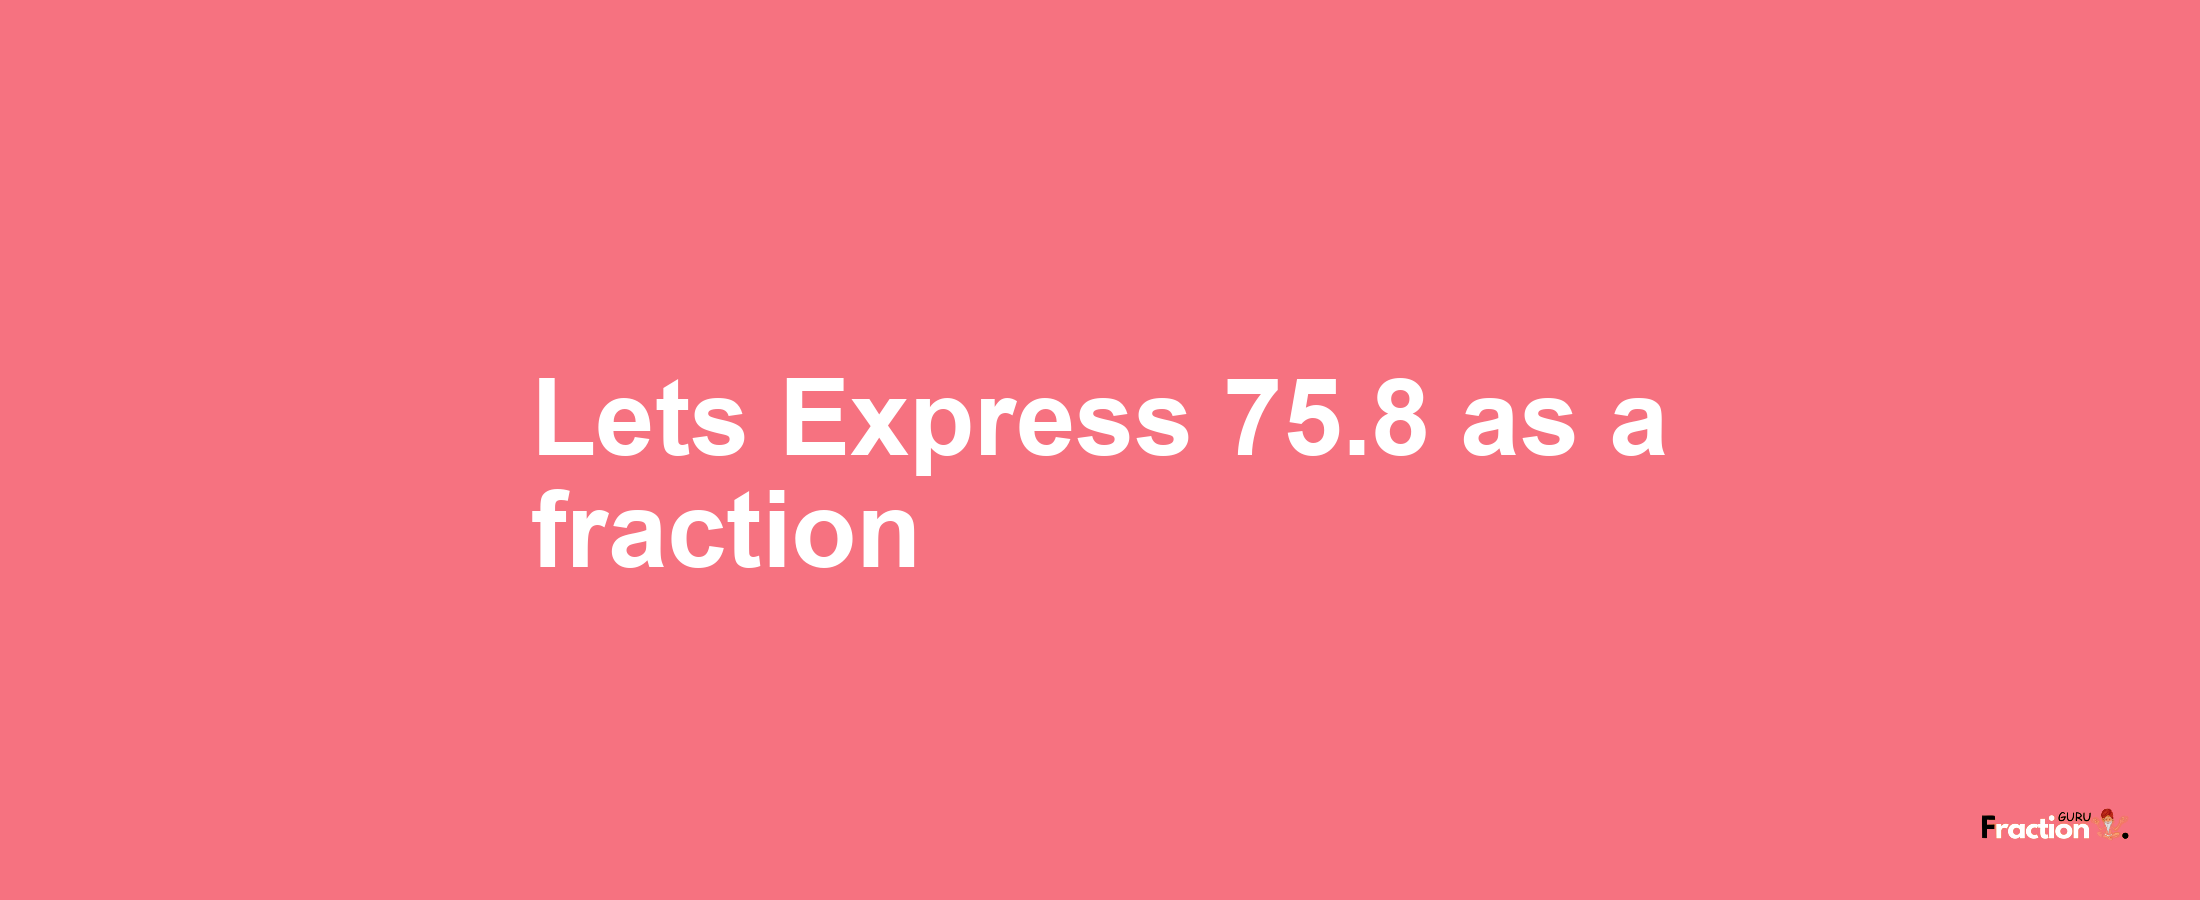 Lets Express 75.8 as afraction